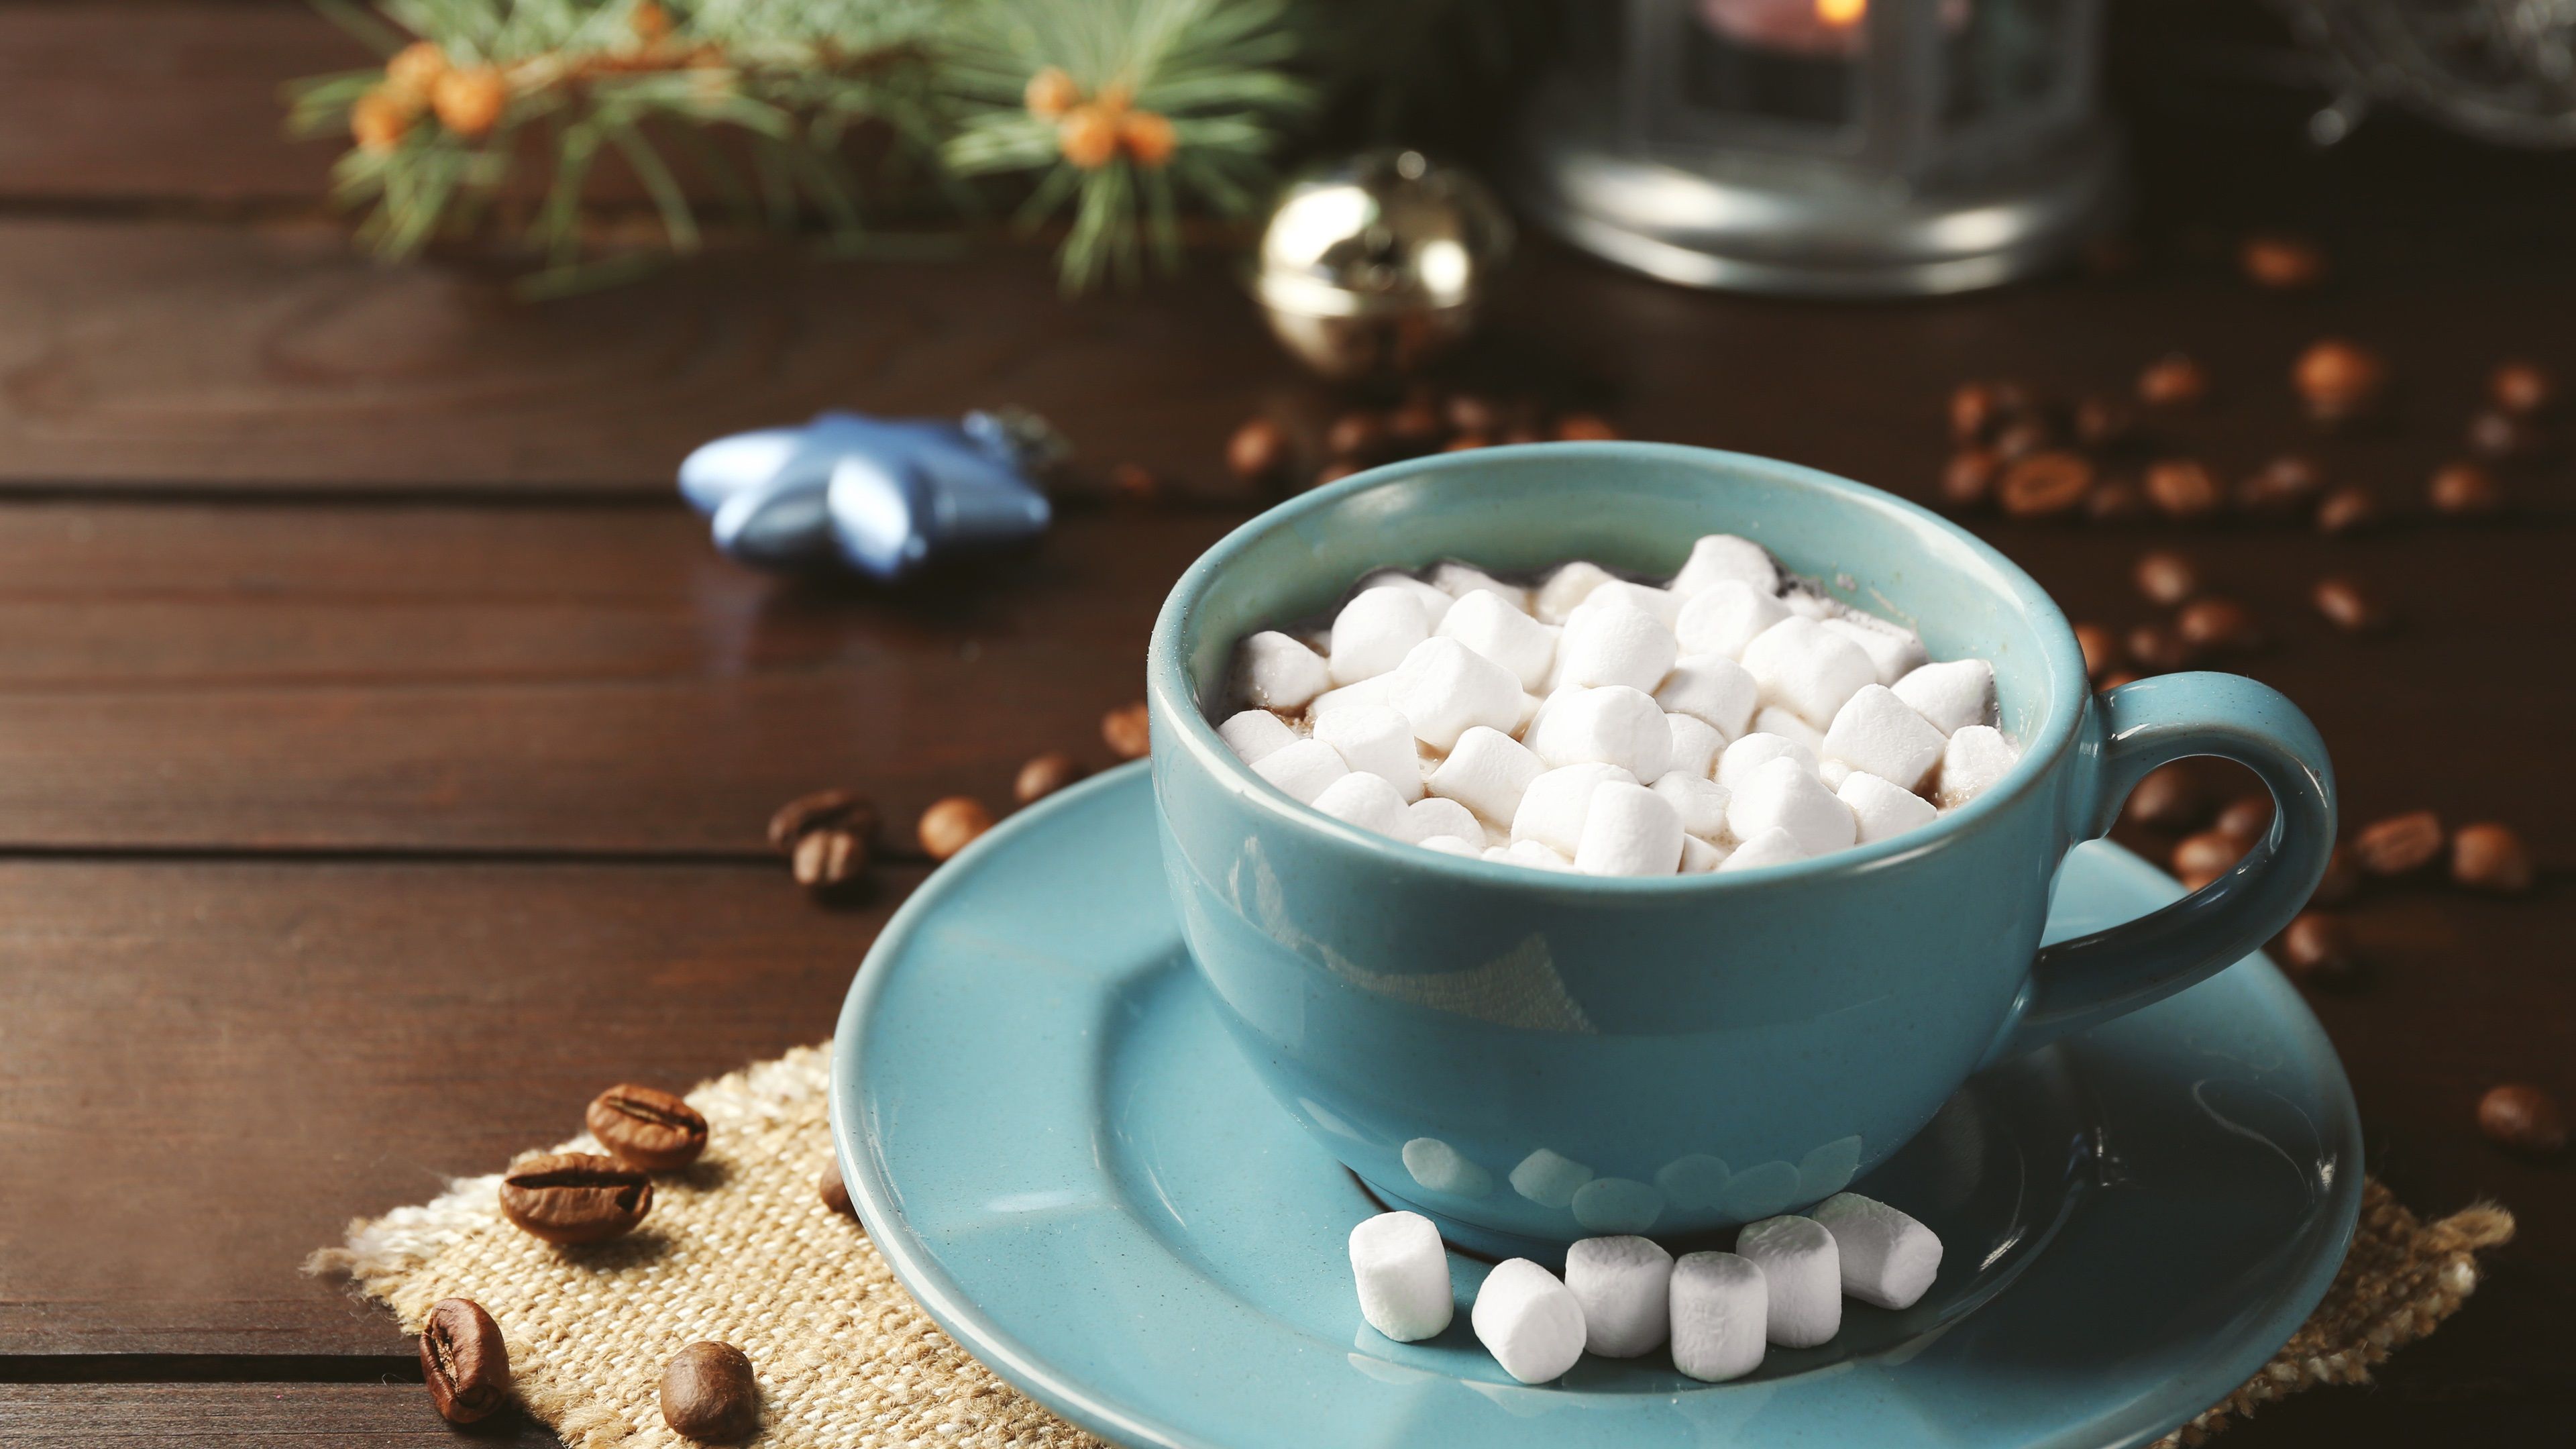 Wallpaper Hot chocolate, cocoa, marshmallow, cup, drinks 3840x2160 UHD 4K Picture, Image